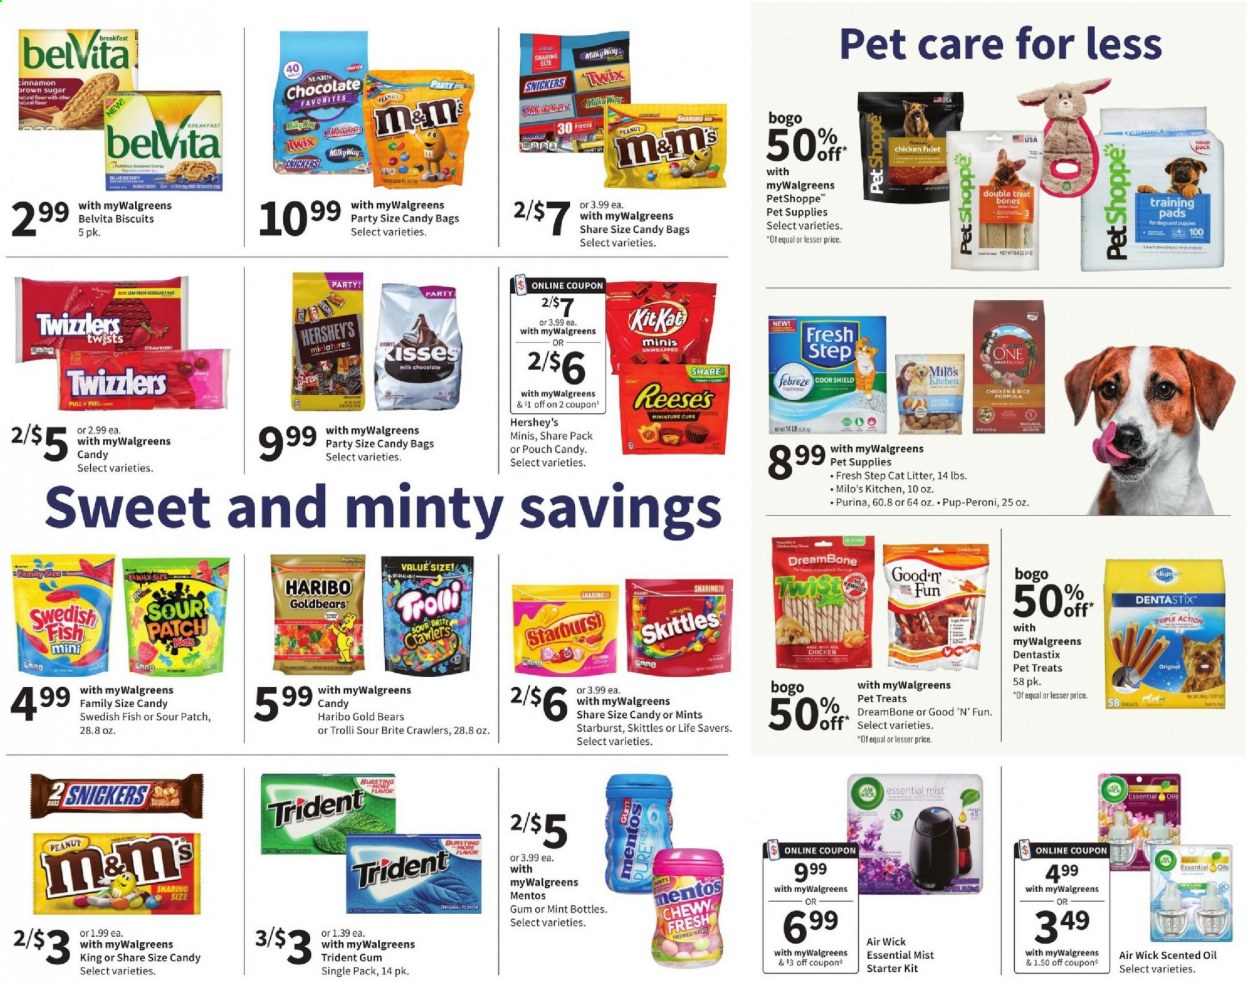 thumbnail - Walgreens Flyer - 06/20/2021 - 06/26/2021 - Sales products - Reese's, Hershey's, milk chocolate, chocolate, Trolli, Mentos, Haribo, Snickers, Twix, Mars, Skittles, Trident, Starburst, Sour Patch, cane sugar, belVita, Febreze, Brite, Air Wick, scented oil, essential oils, PetShoppe, Purina, Dentastix, Good 'n' Fun, Pup-Peroni, Fresh Step. Page 7.